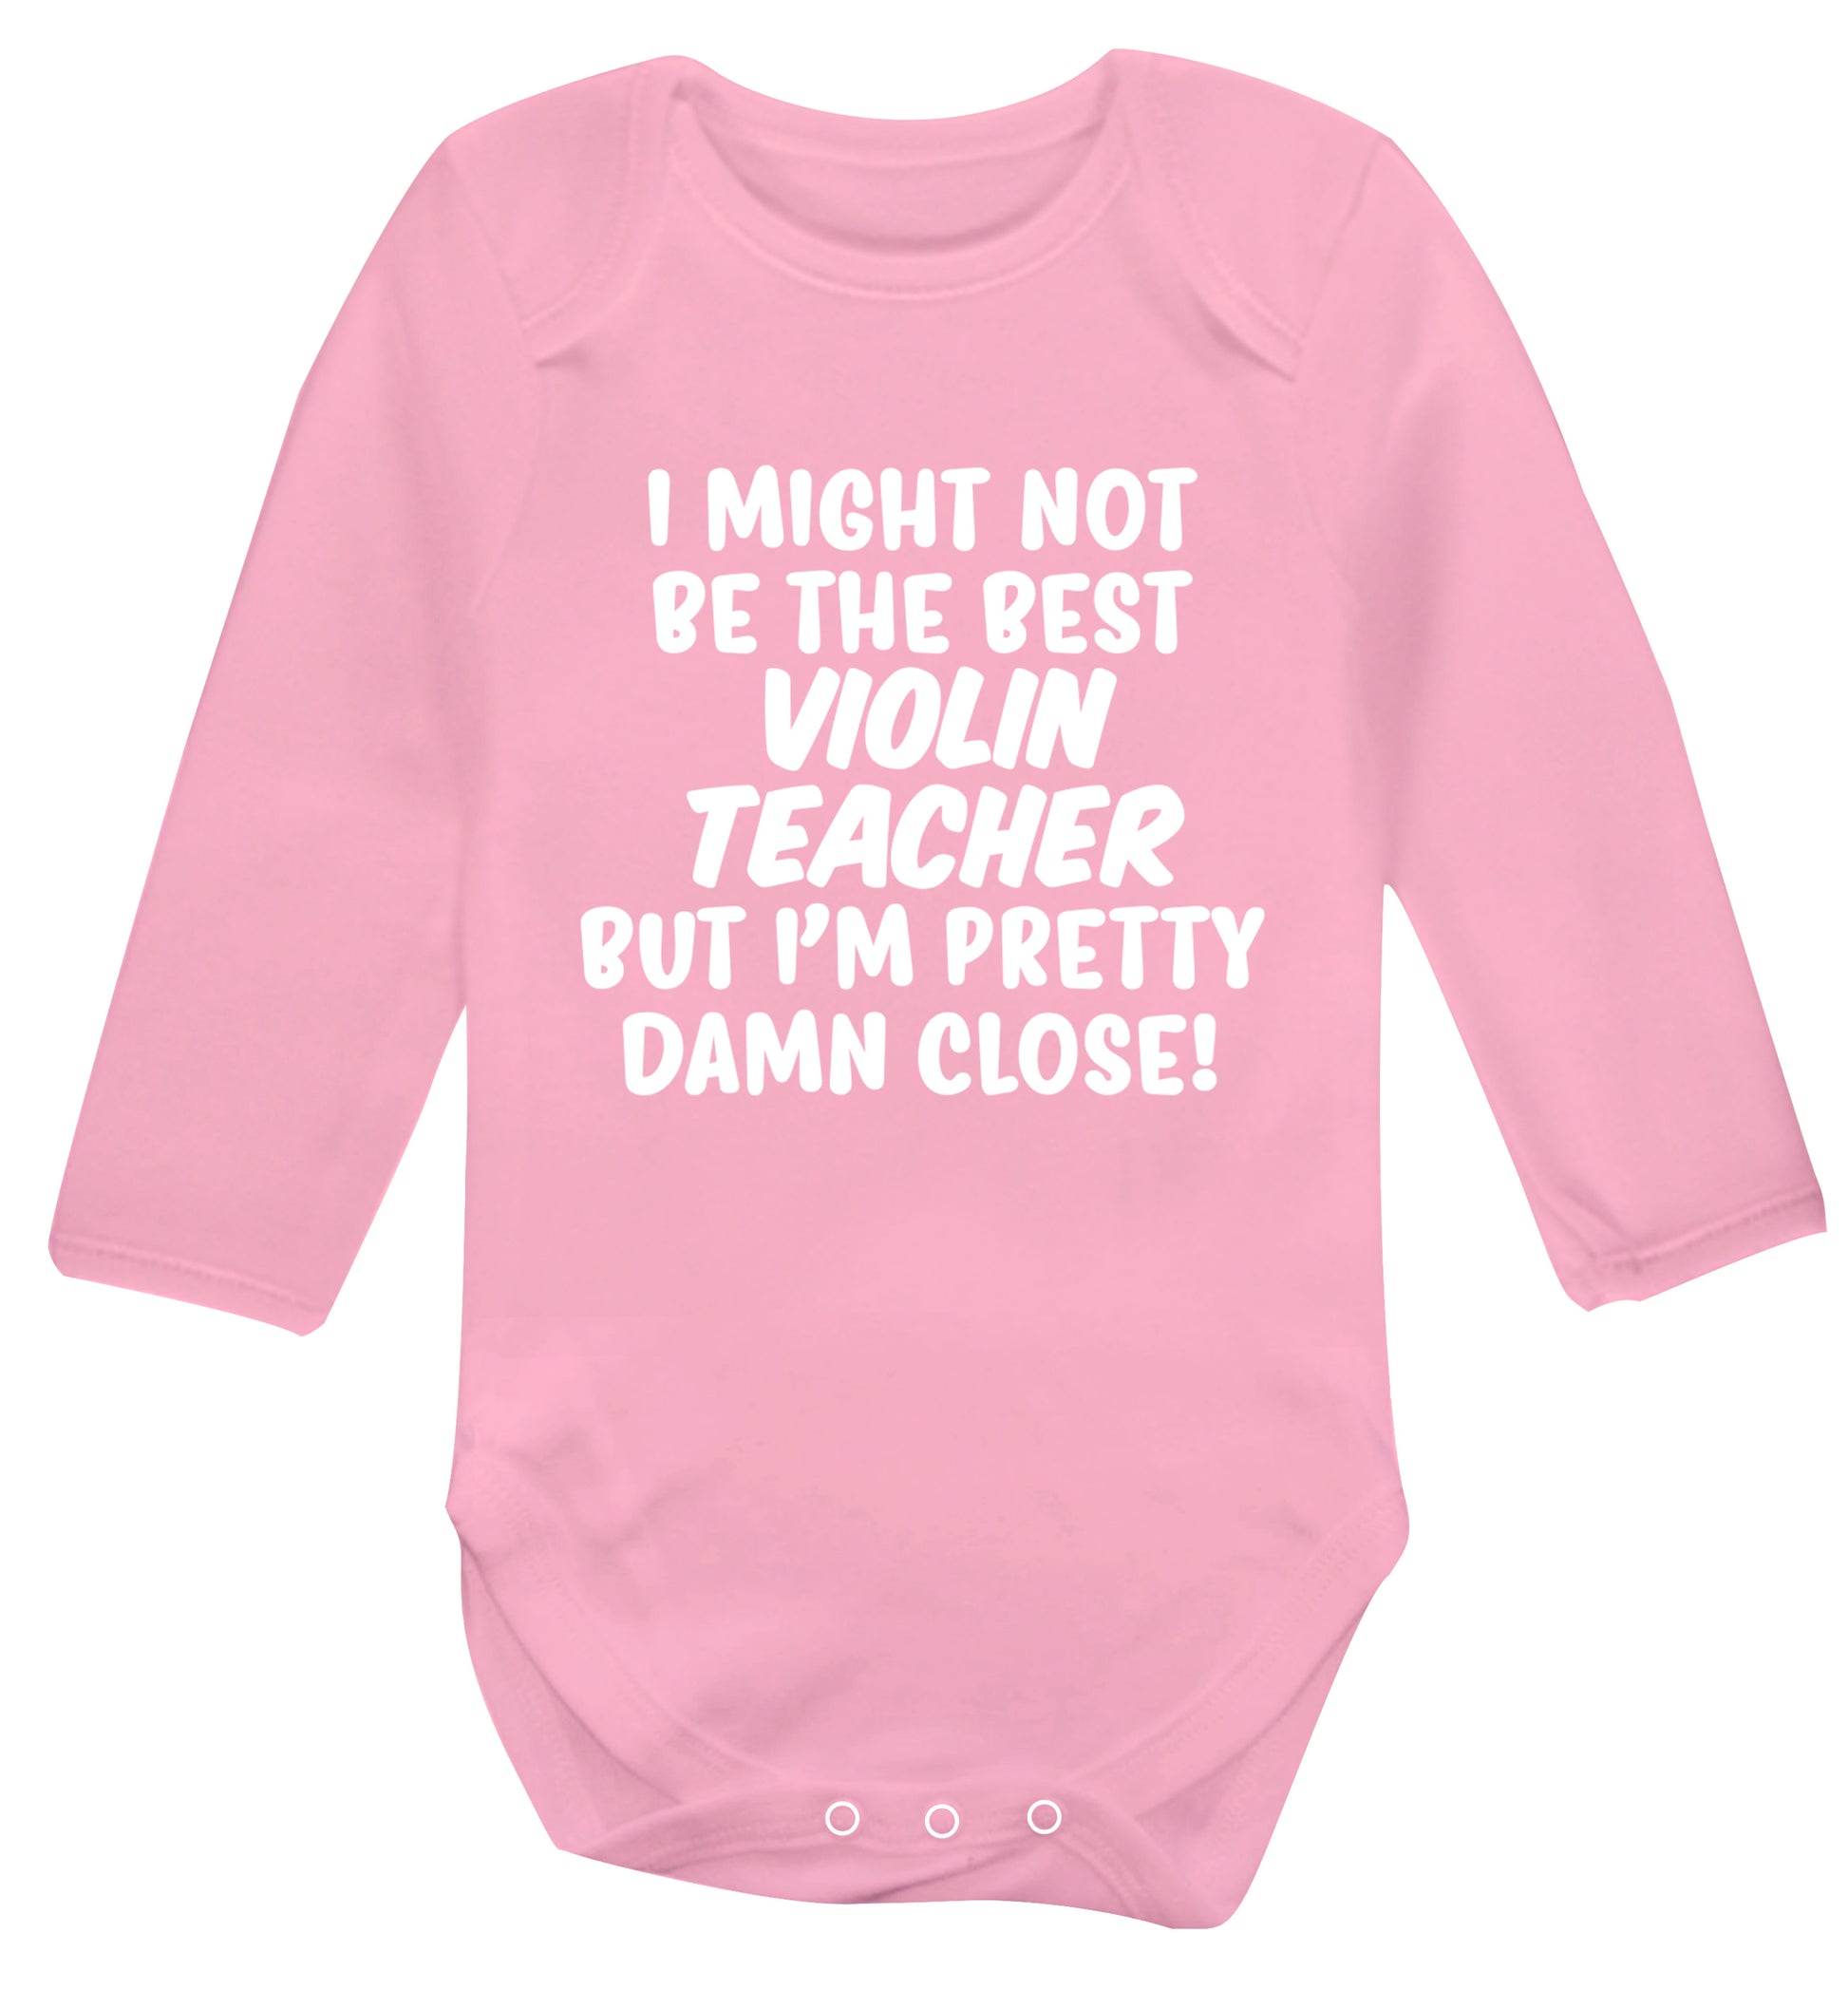 I might not be the best violin teacher but I'm pretty close Baby Vest long sleeved pale pink 6-12 months